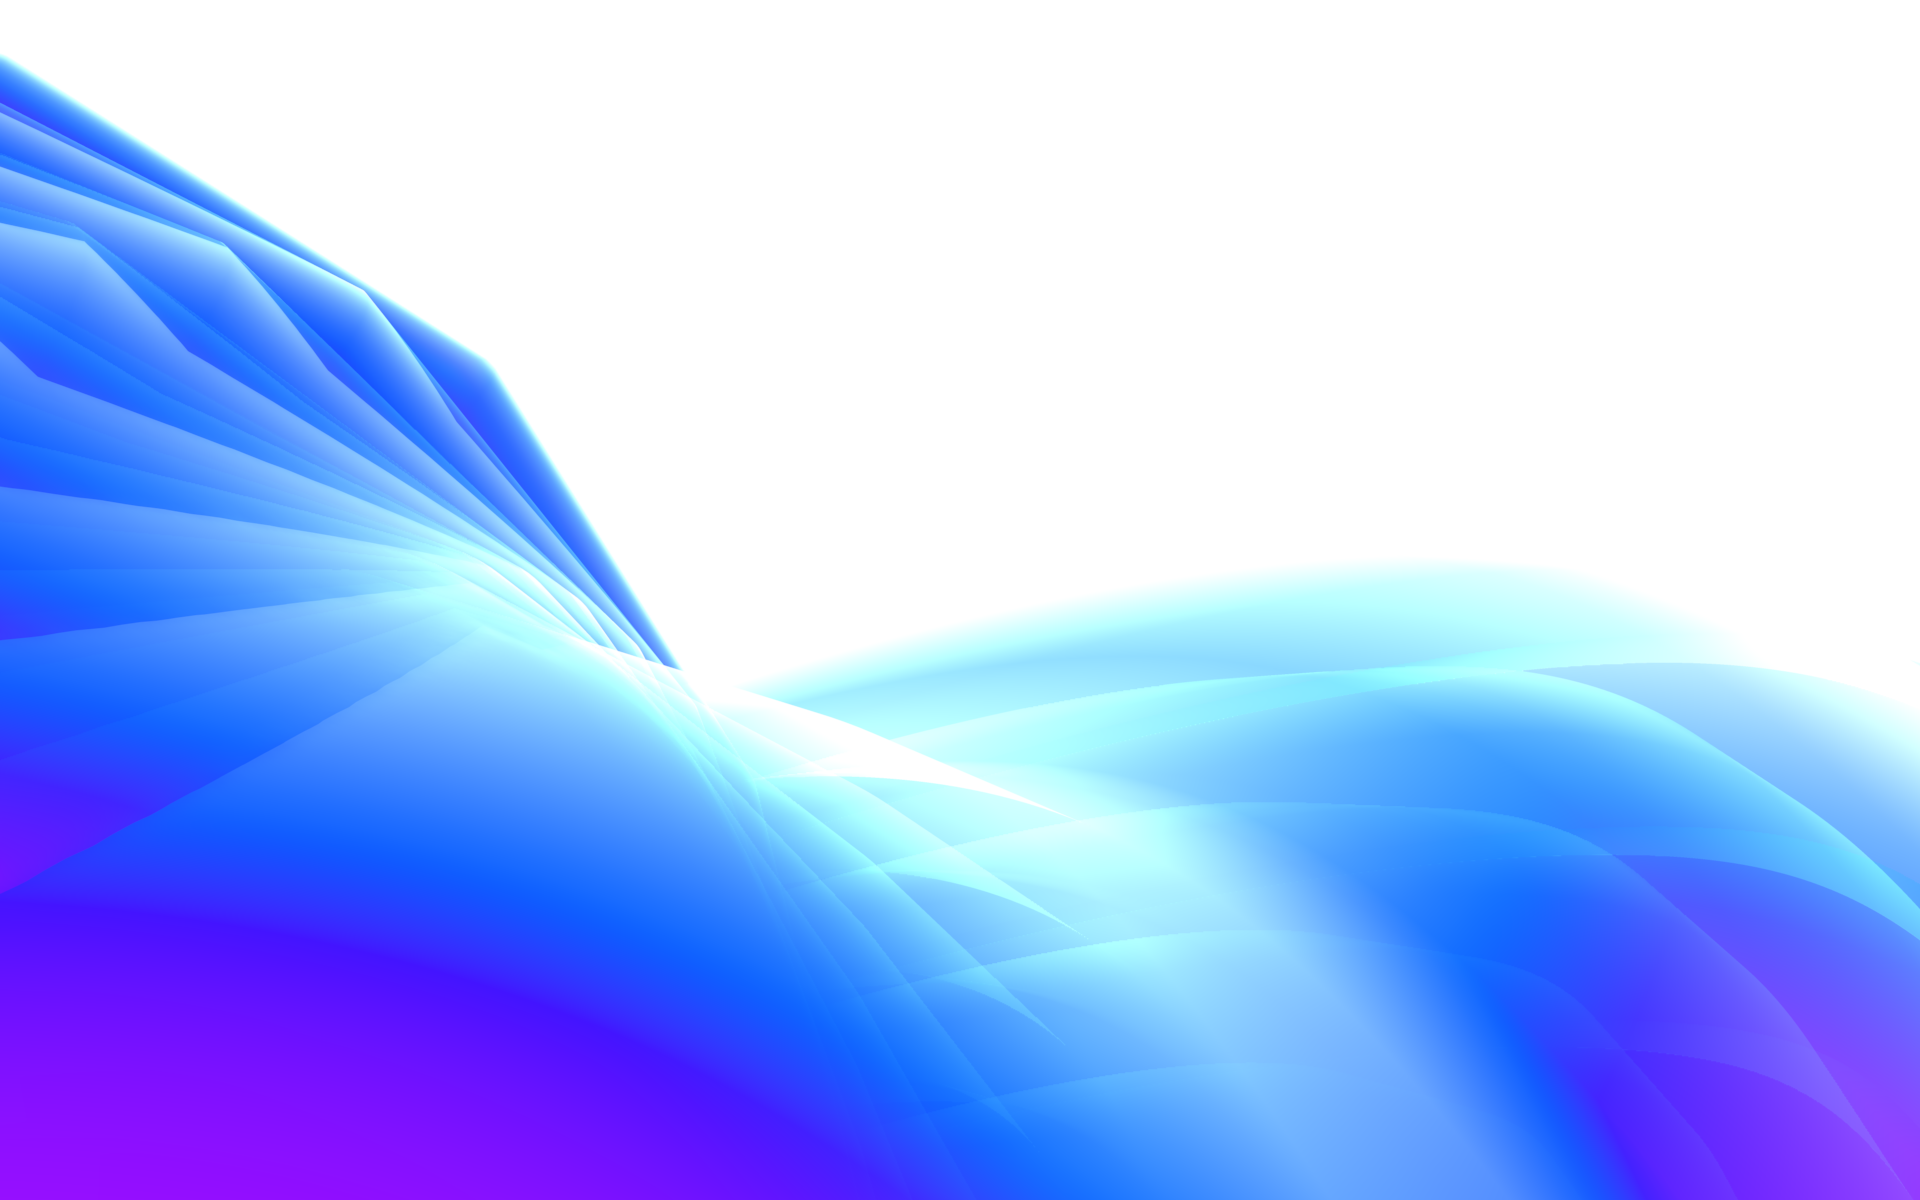 Gradient Waves High Quality Image